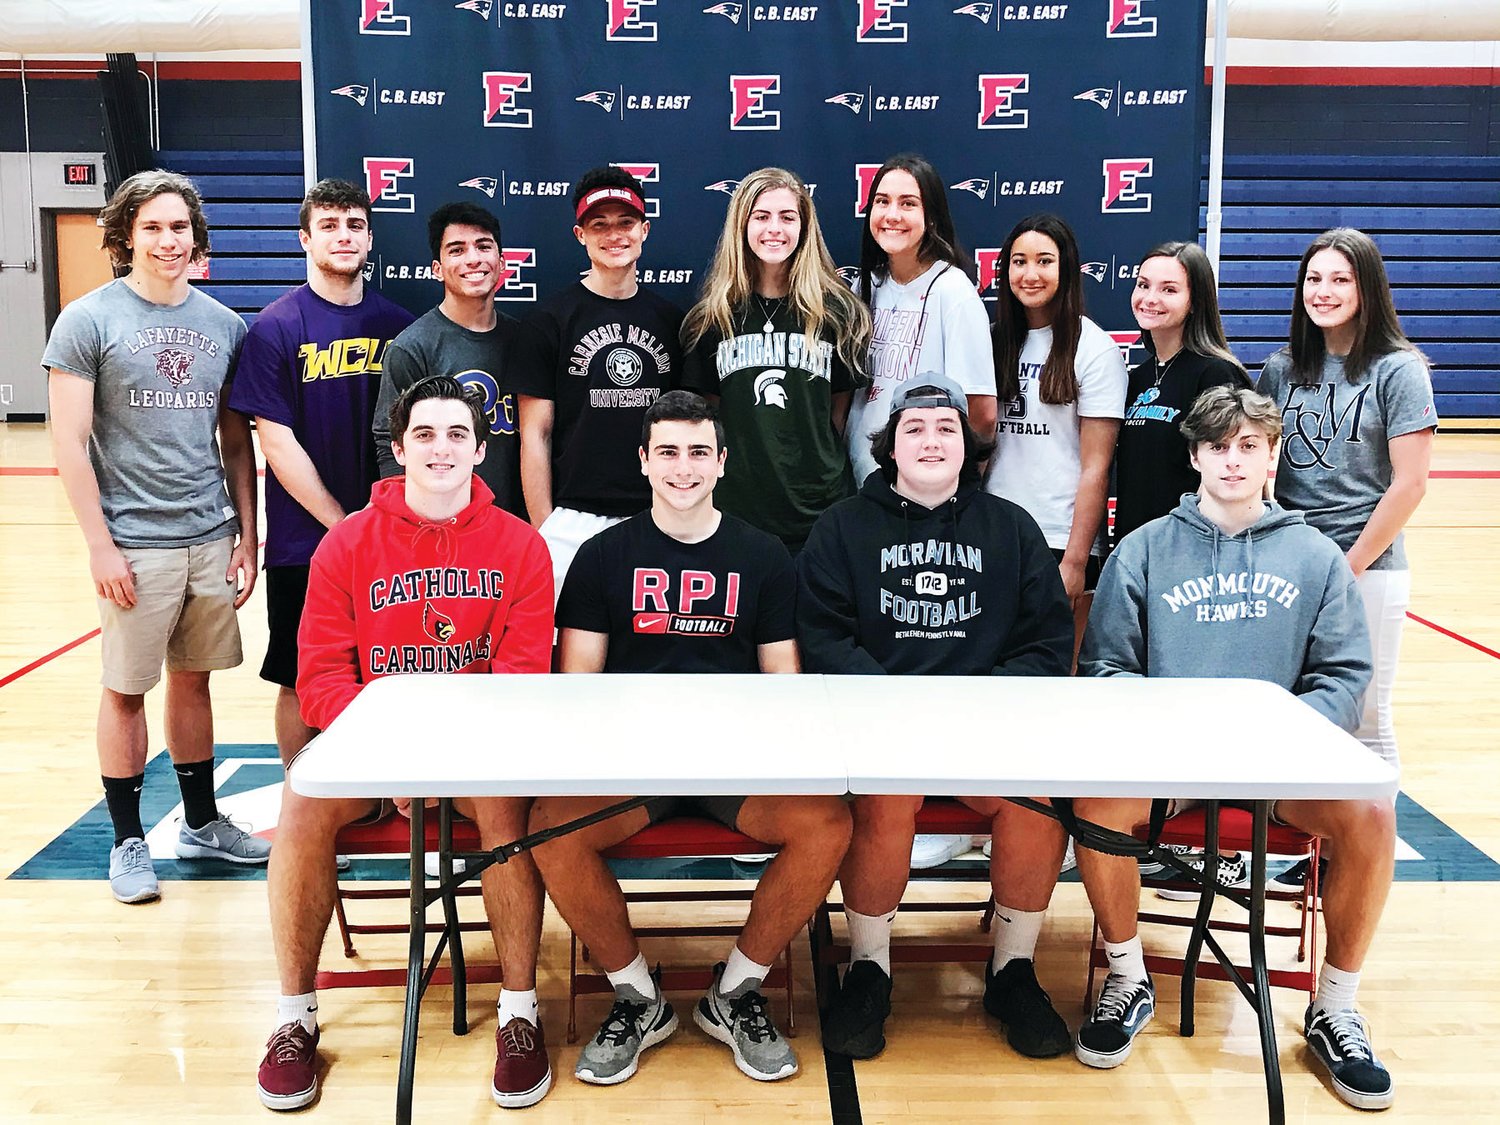 CB East seniors who were recently recognized for committing to compete in collegiate sports are, from left, back row, Tommy Krystkiewicz, Joe Jackman, Marcos Lopez, Luke Blackwell, Olivia Portner, Emily Chmiel, Soleil Dooner, Isabella Mignon, Sophie Moyer; front row,  Anthony Giordano, Mark Lapioli, Reins Leedy and Will Silverman.